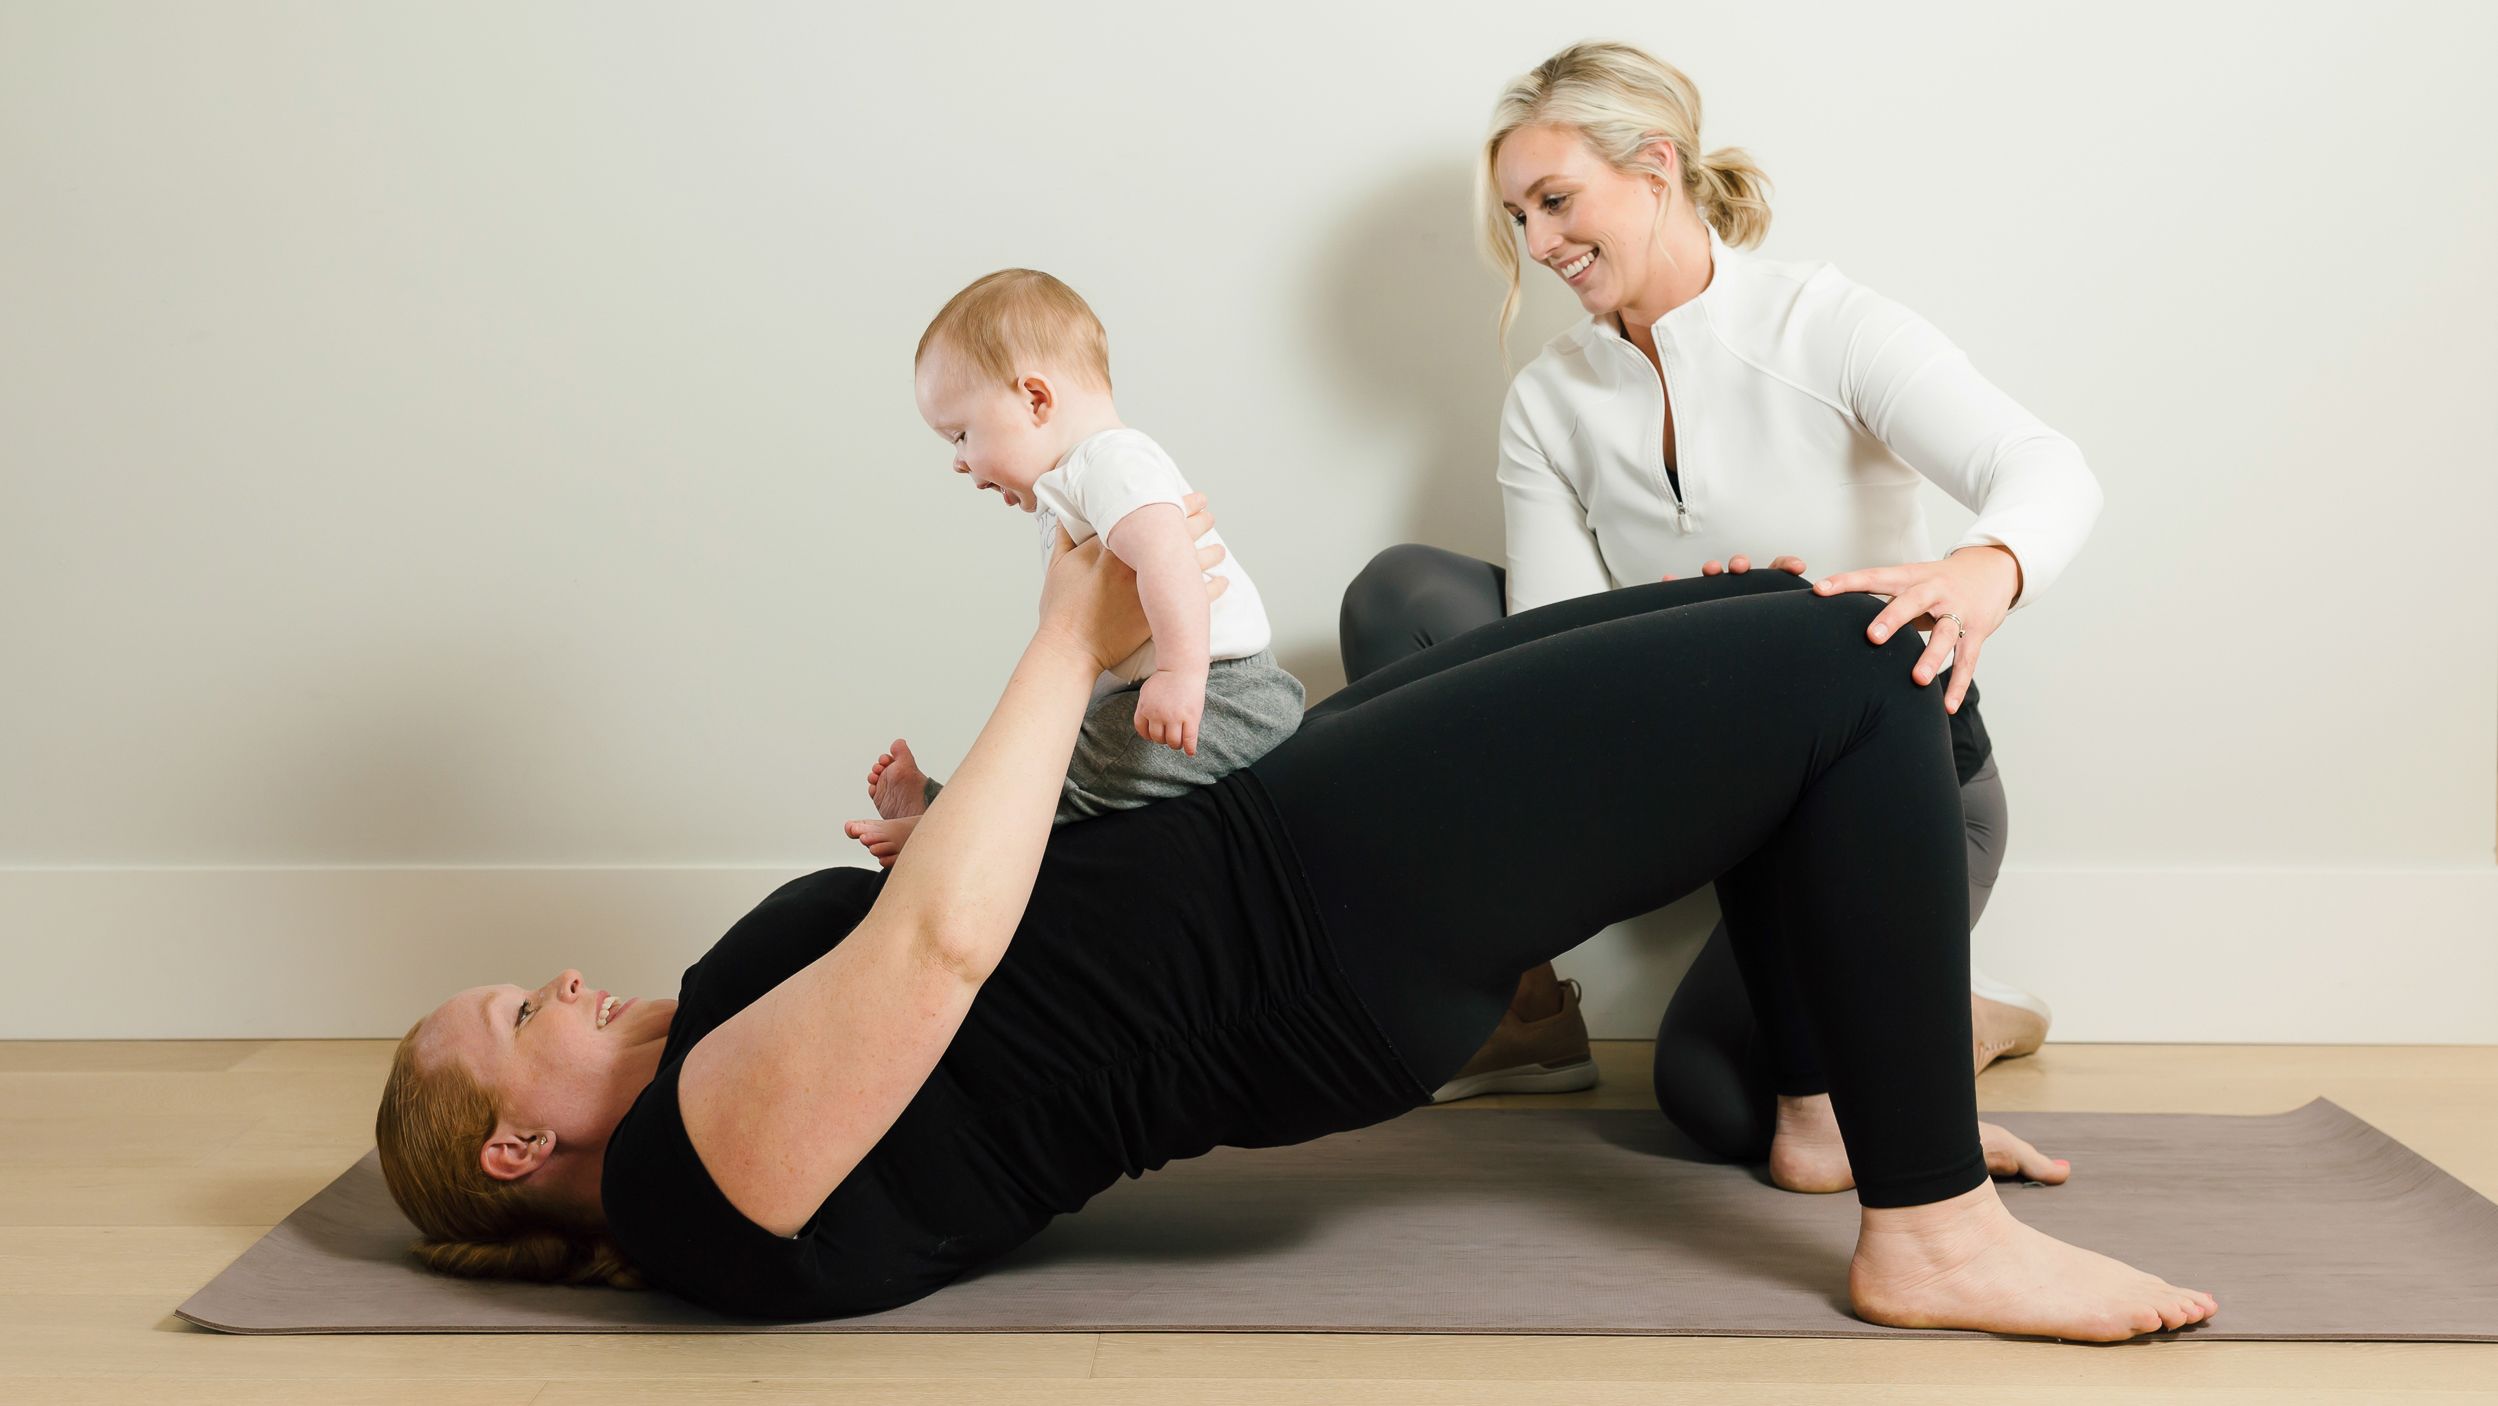 Family workouts: Get the whole family fit in 15 minutes a day